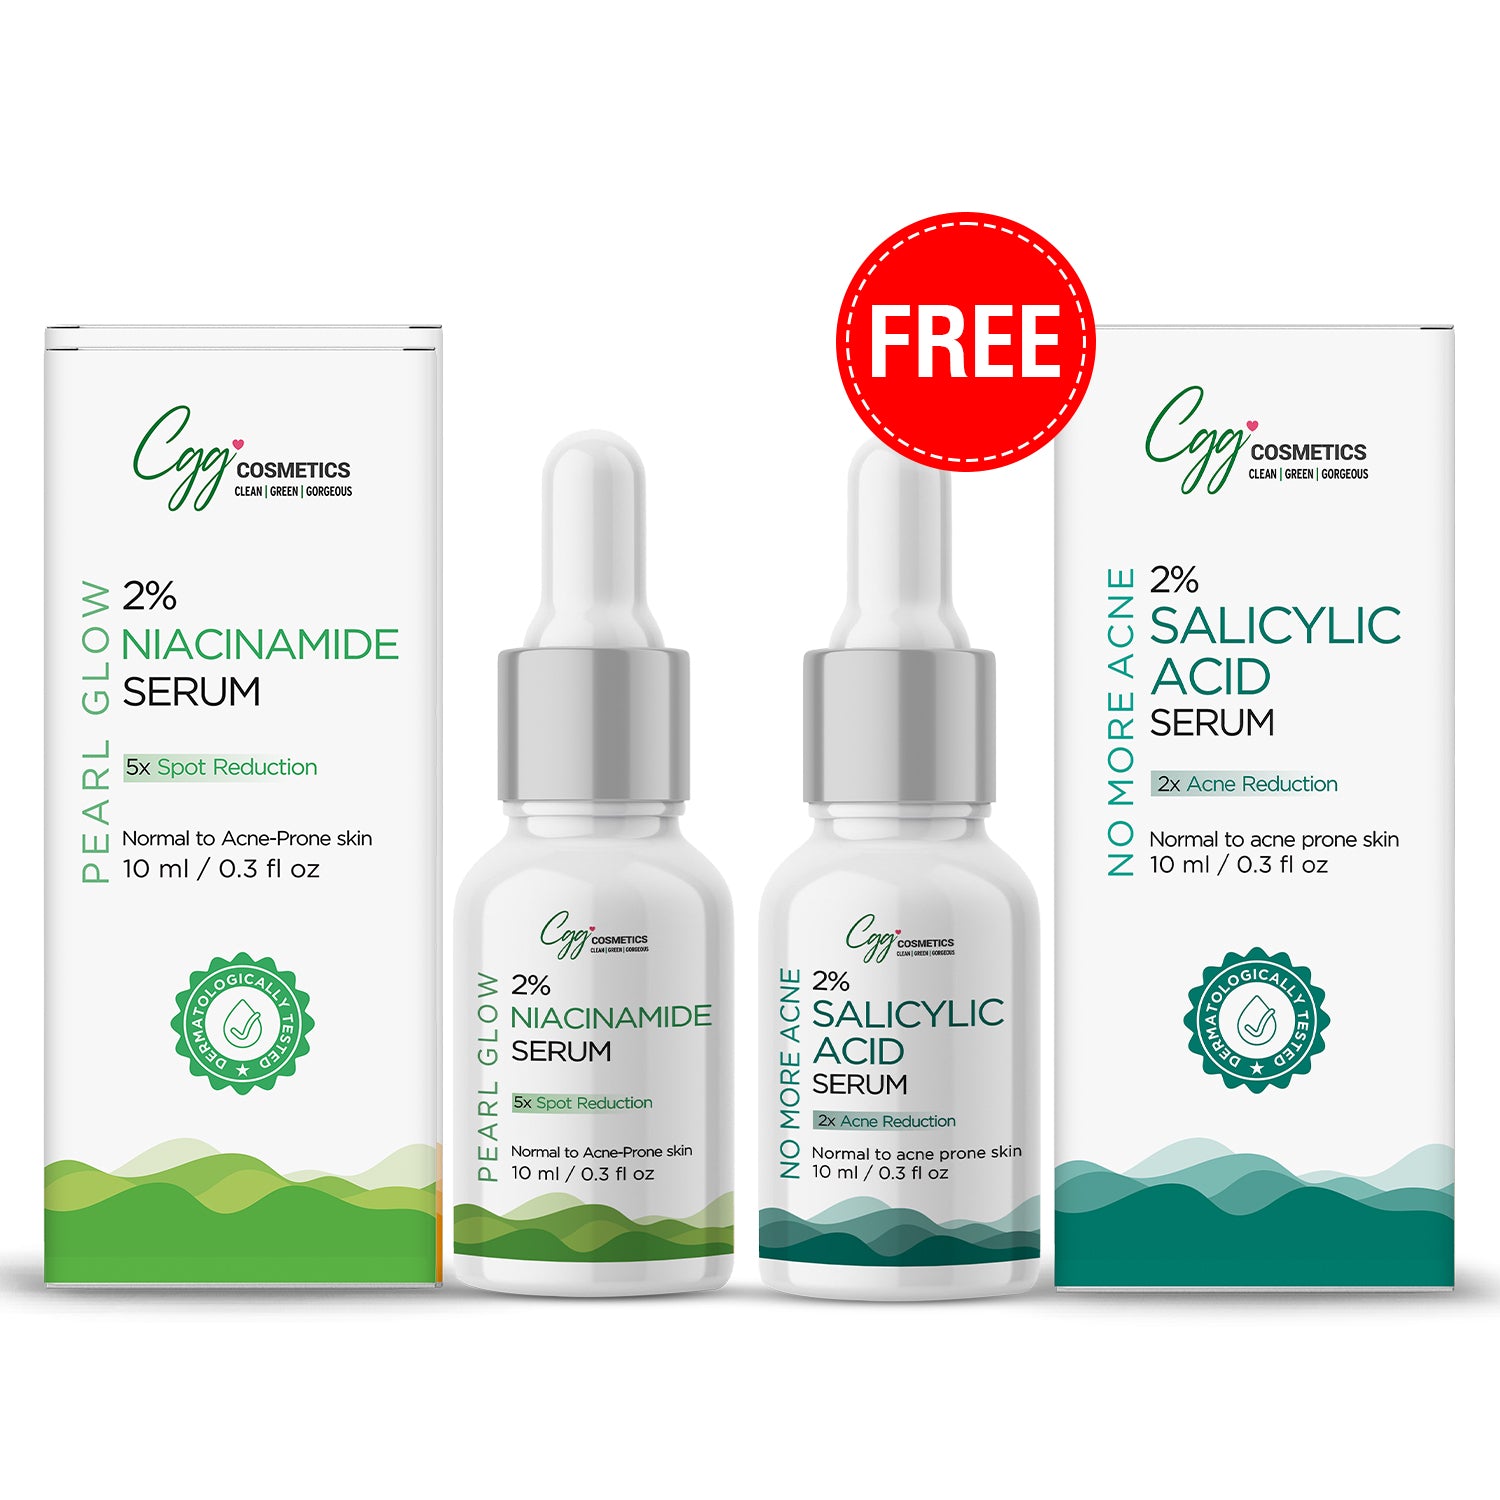 CGG Cosmetics Am/Pm Acne-Reduction Combo - 2% Niacinamide 10ml Serum + FREE 10ml 2% Salicylic Acid Face Serum for acne prone-spoted skin